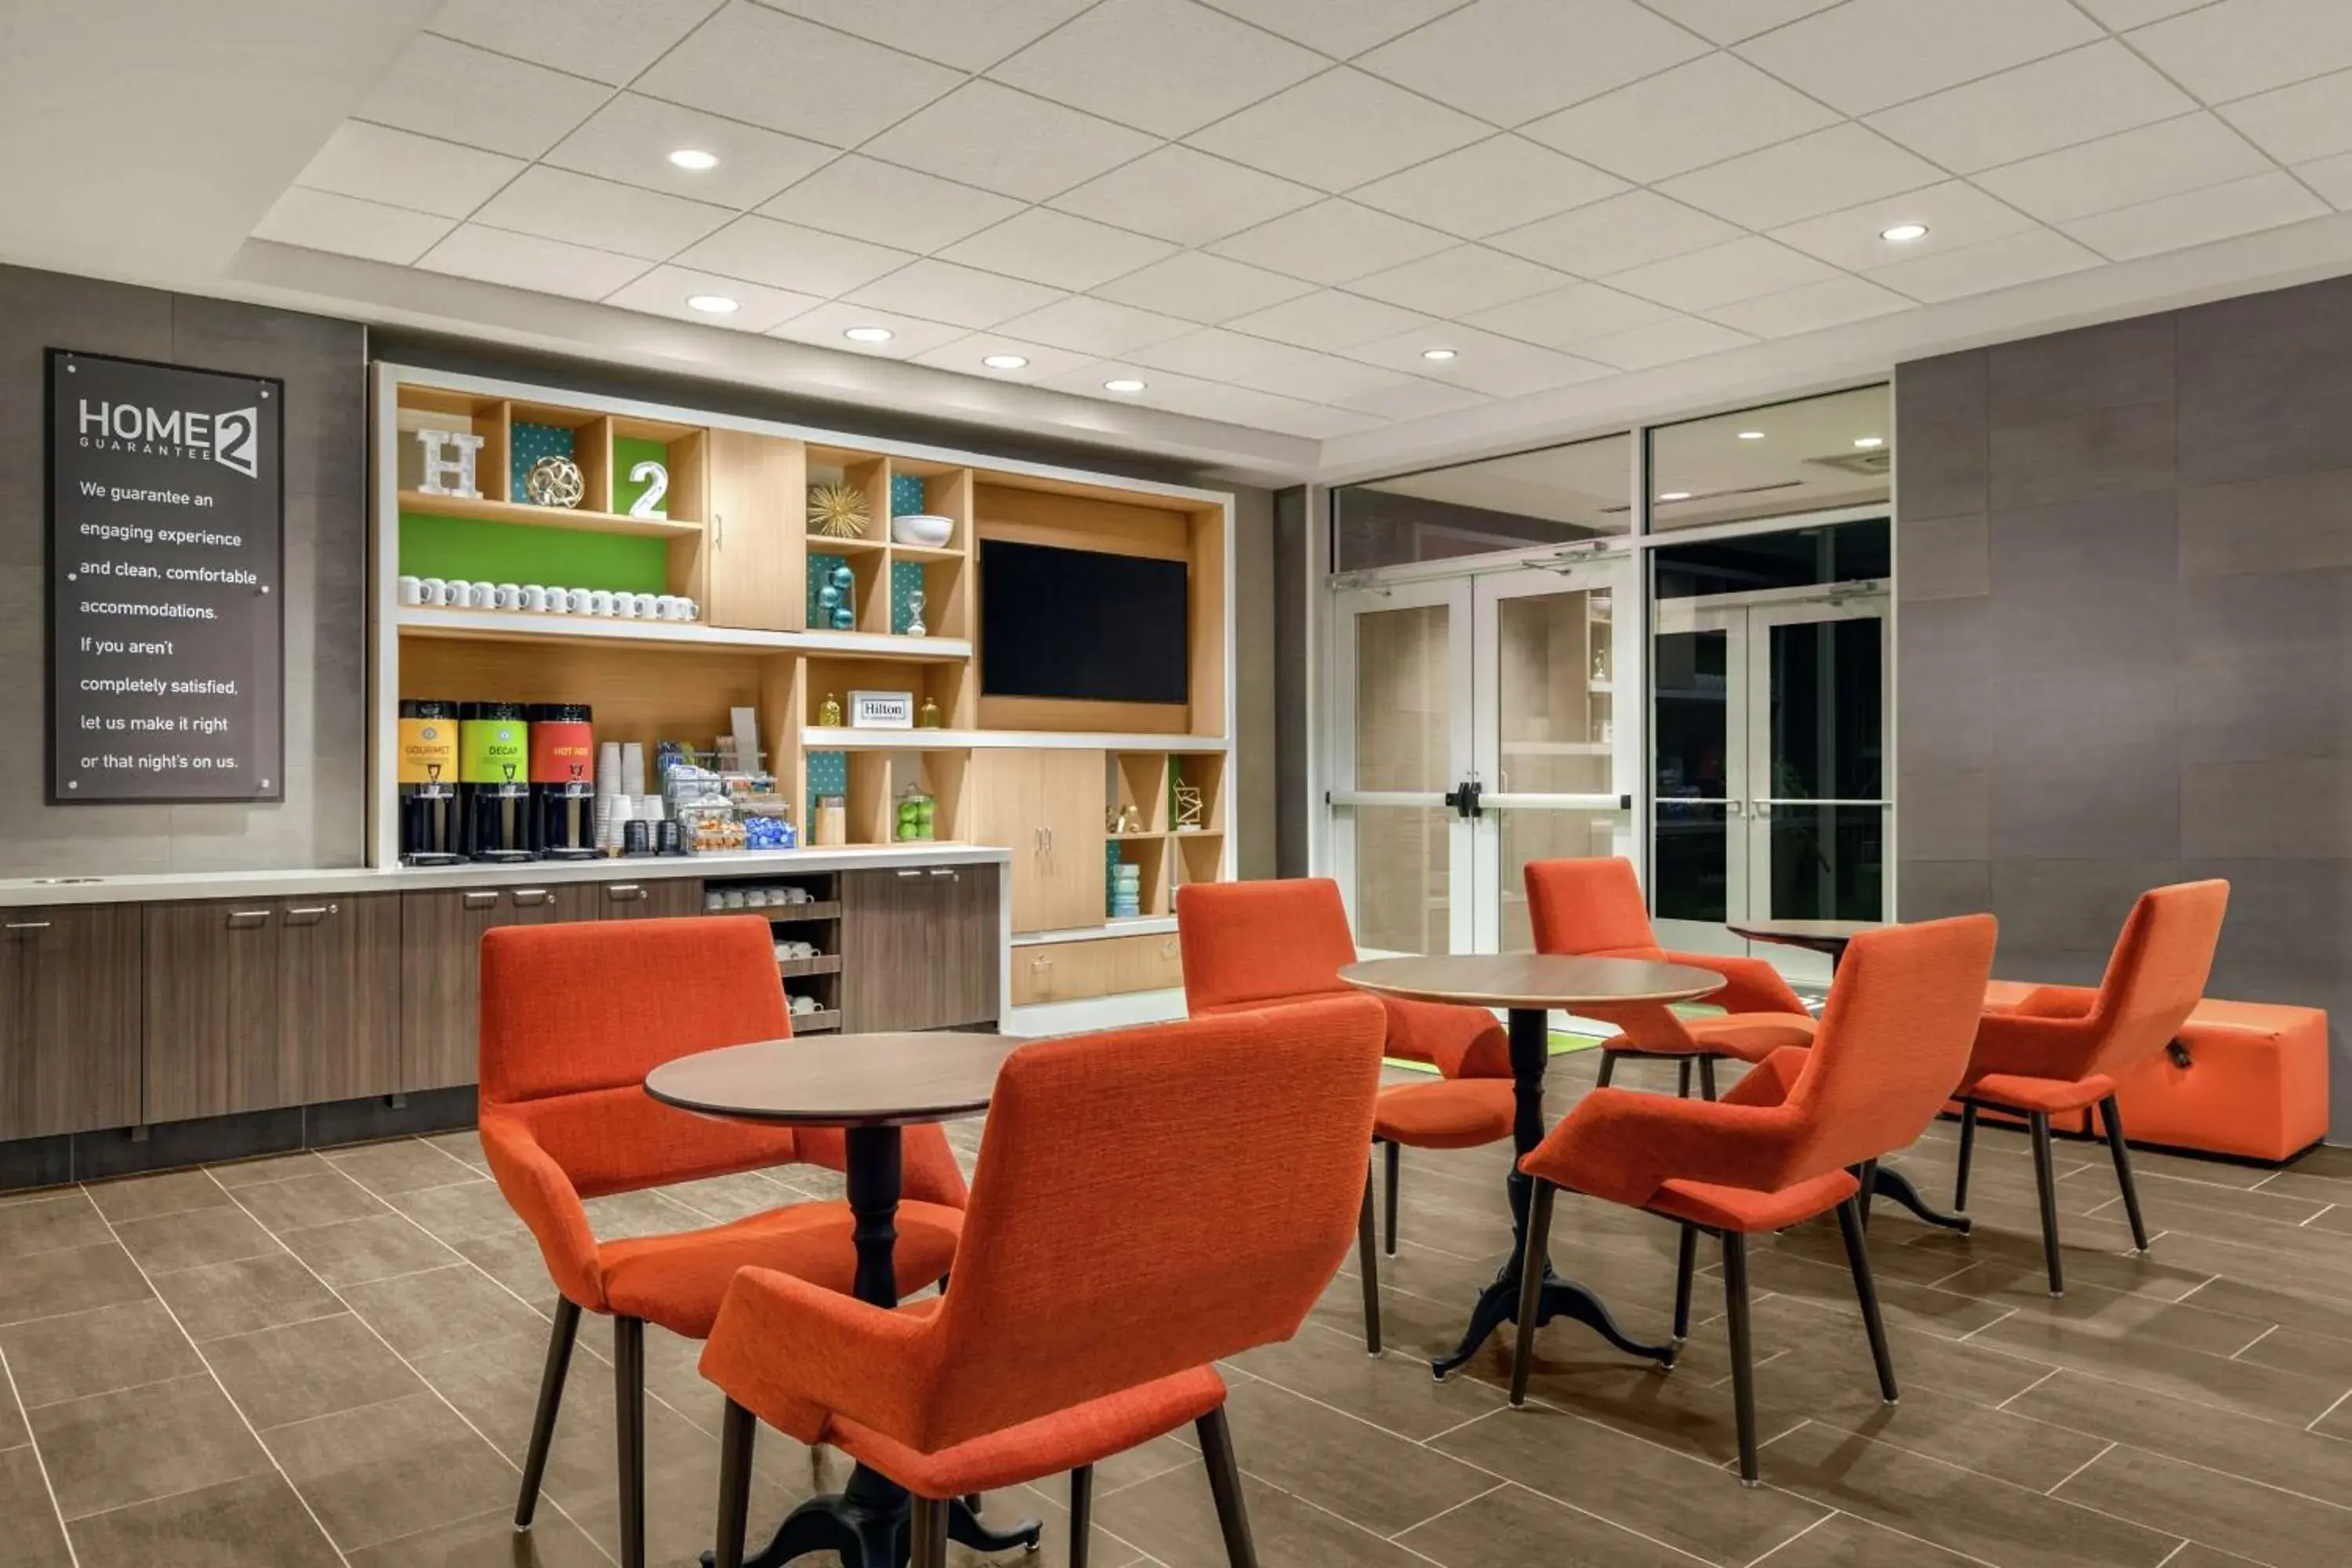 Dining area, Lounge/Bar in Home2 Suites by Hilton Sarasota - Bradenton Airport, FL